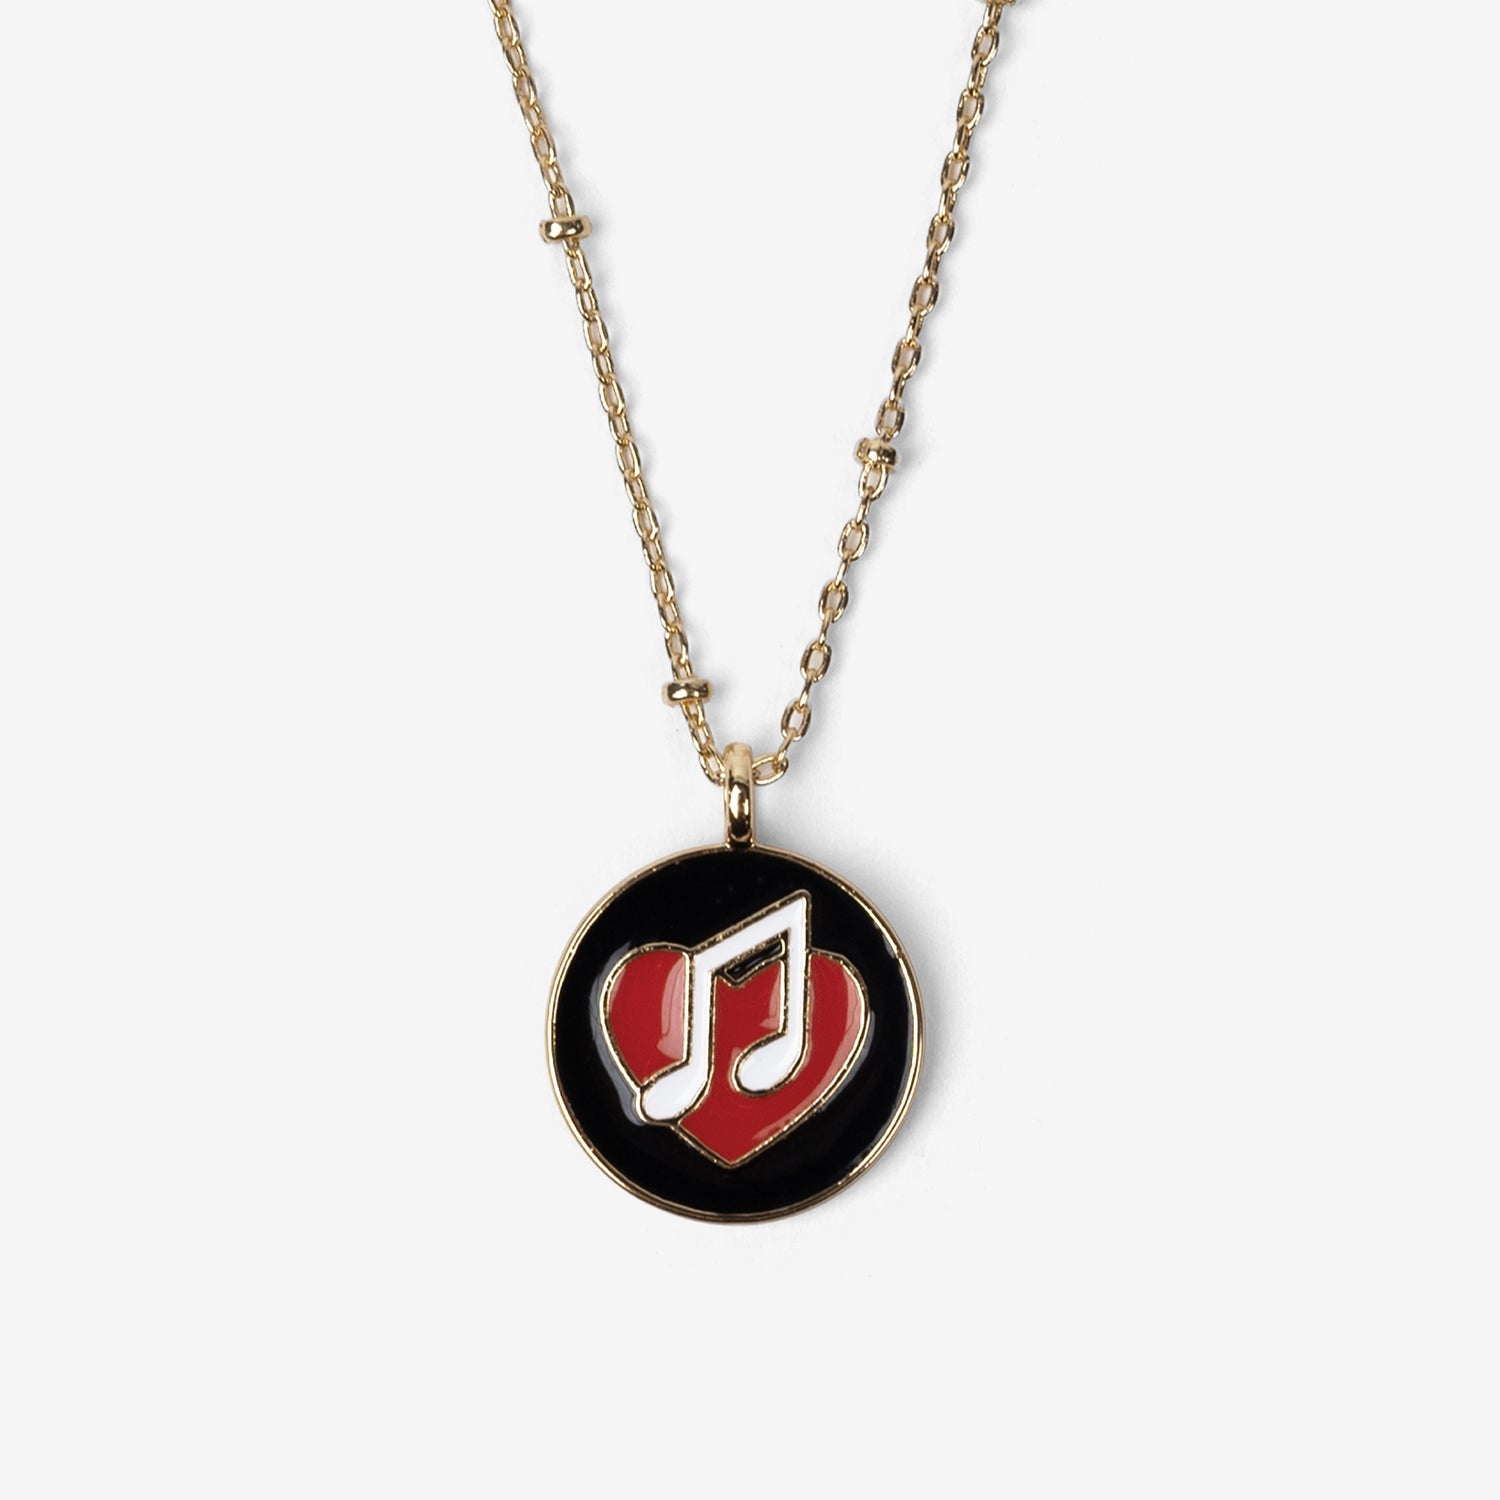 NECKLACE Produced By Jun. K / Jun. K (From 2PM)『BEST LIVE “3 NIGHTS”』